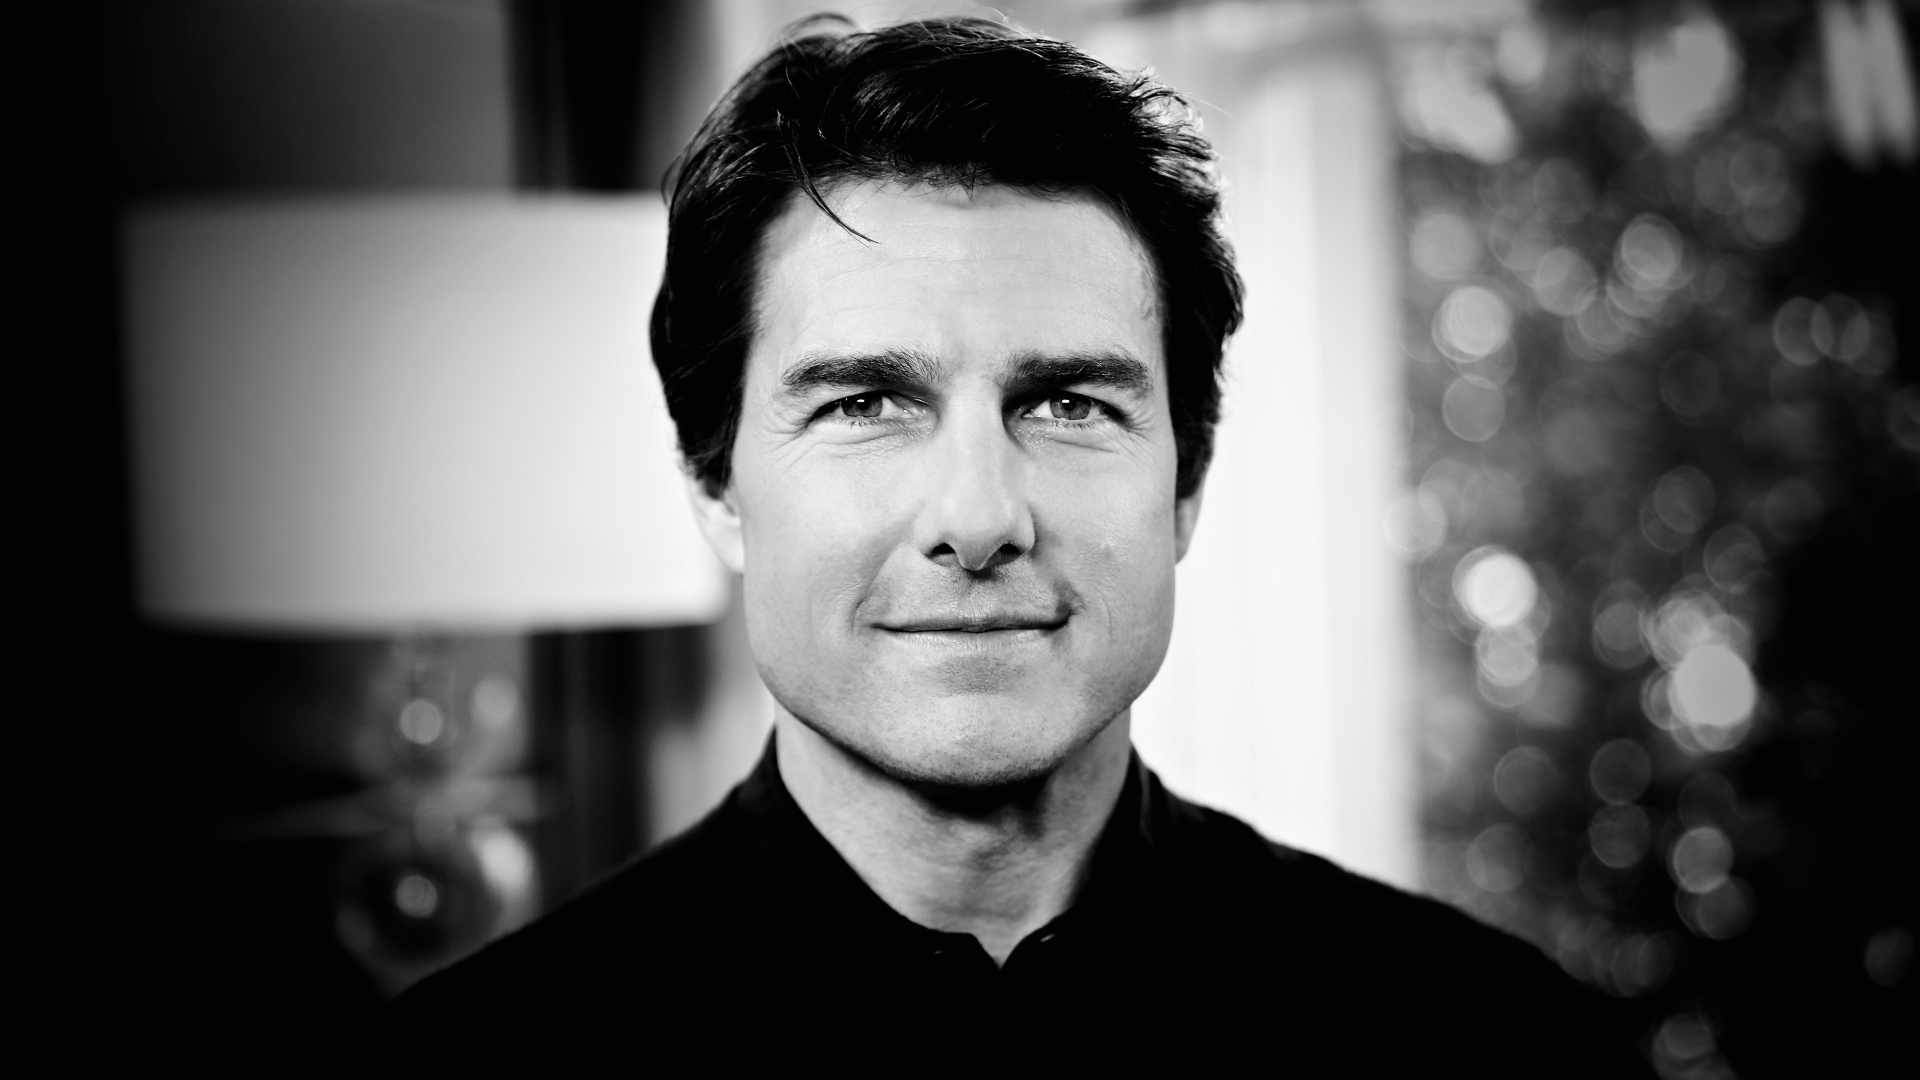 Tom Cruise, Black and White, Portrait, Face, Chin. Wallpaper in 1920x1080 Resolution